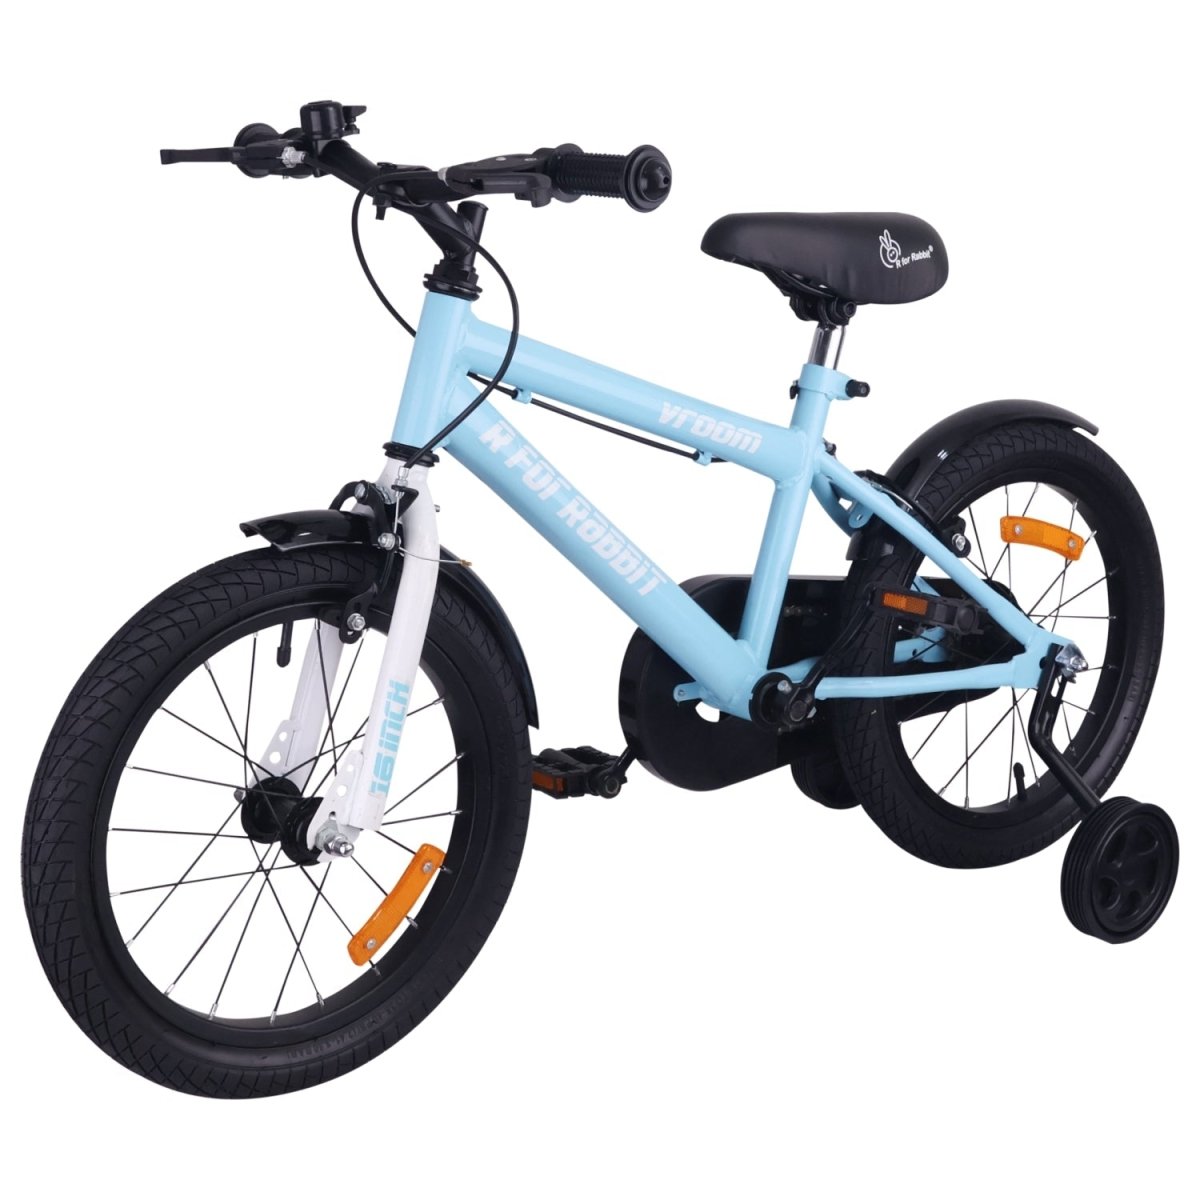 R for Rabbit Vroom Bicycle Lake Blue- 16Inch - BLVRLB16